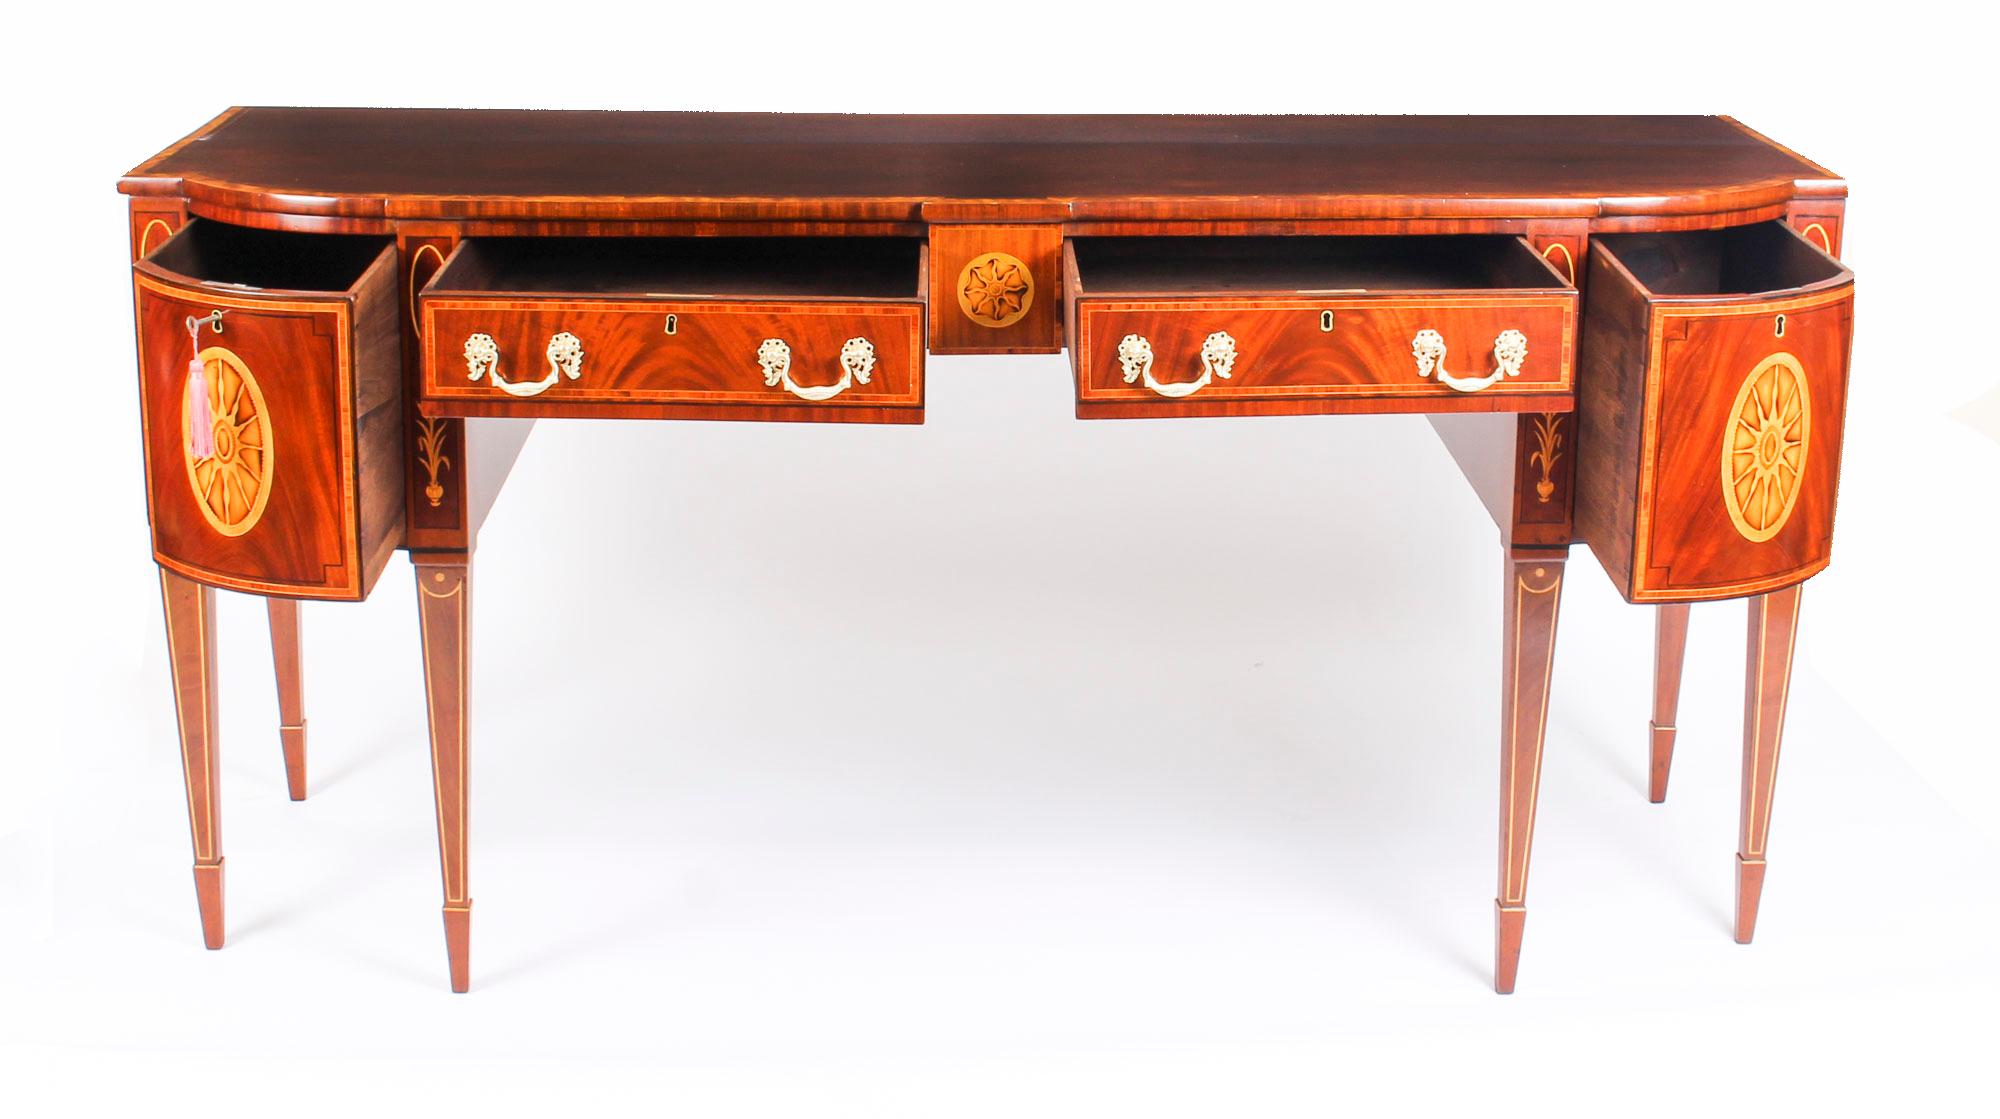 Antique Regency Flame Mahogany and Satinwood Inlaid Sideboard, 19th Century 3